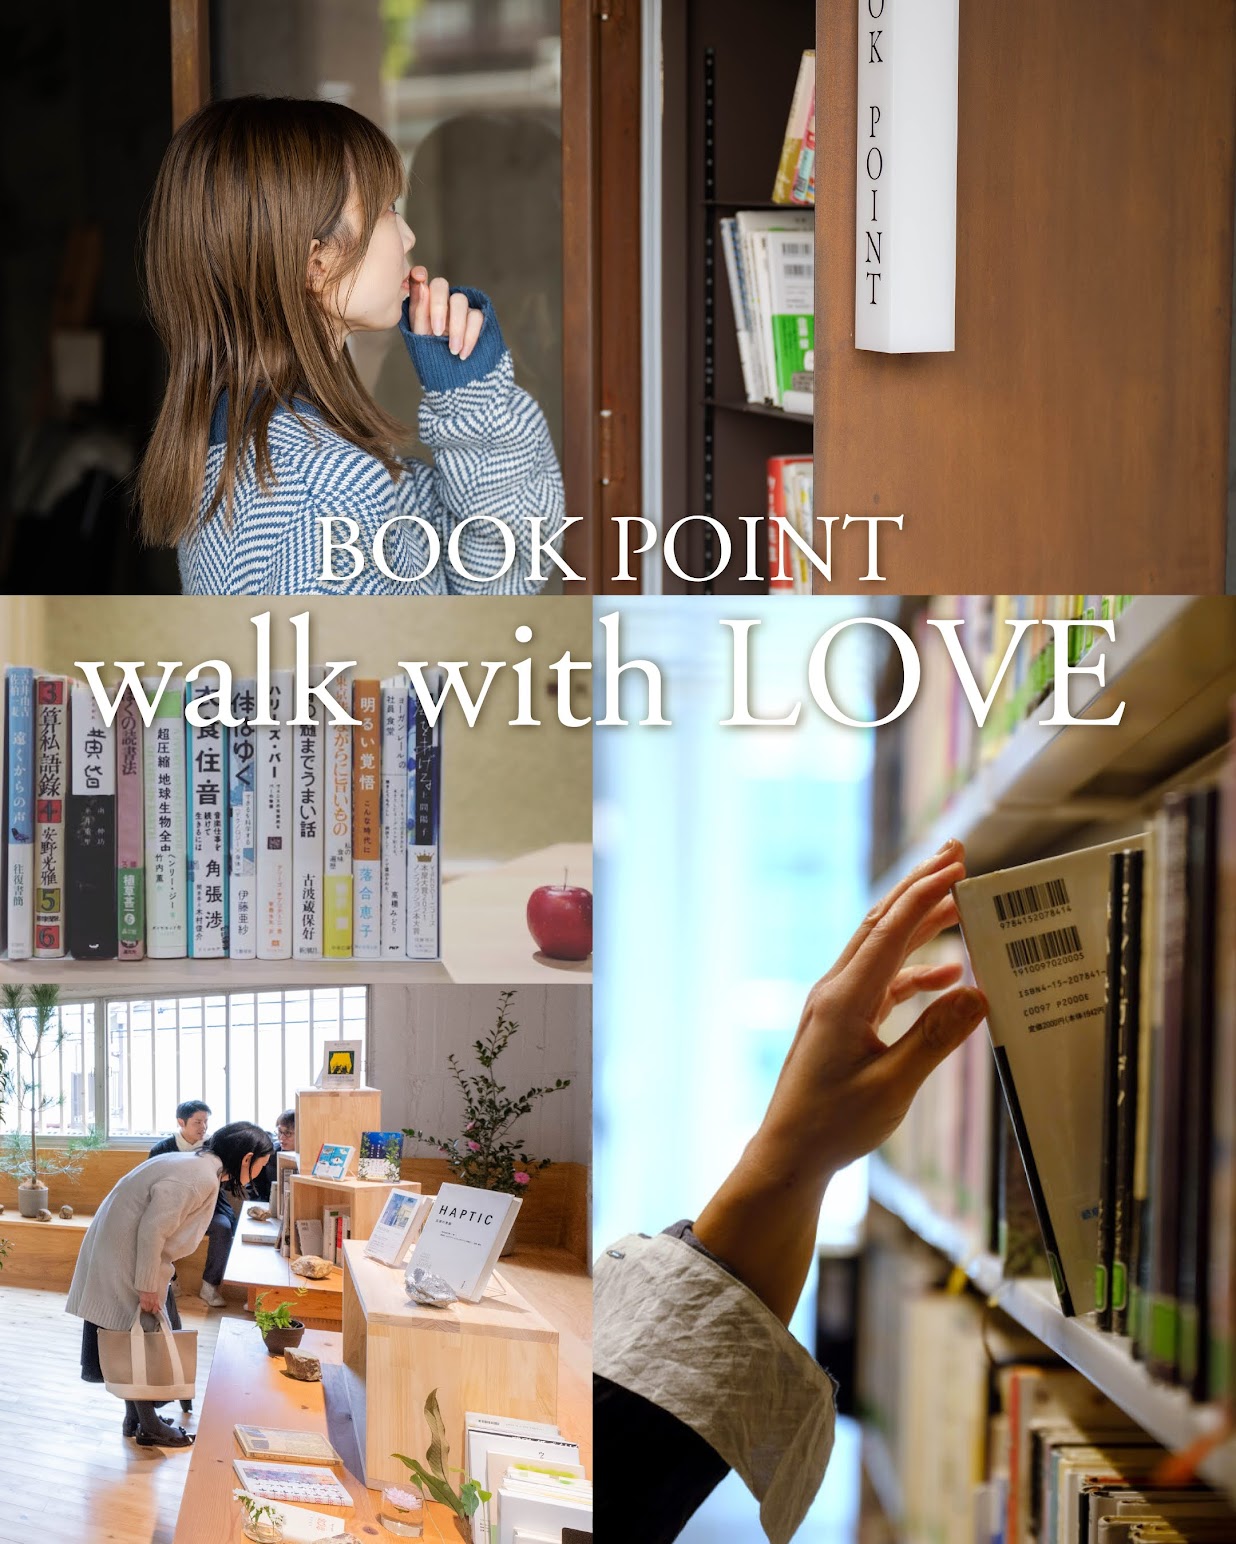 BOOK PONT walk with LOVE